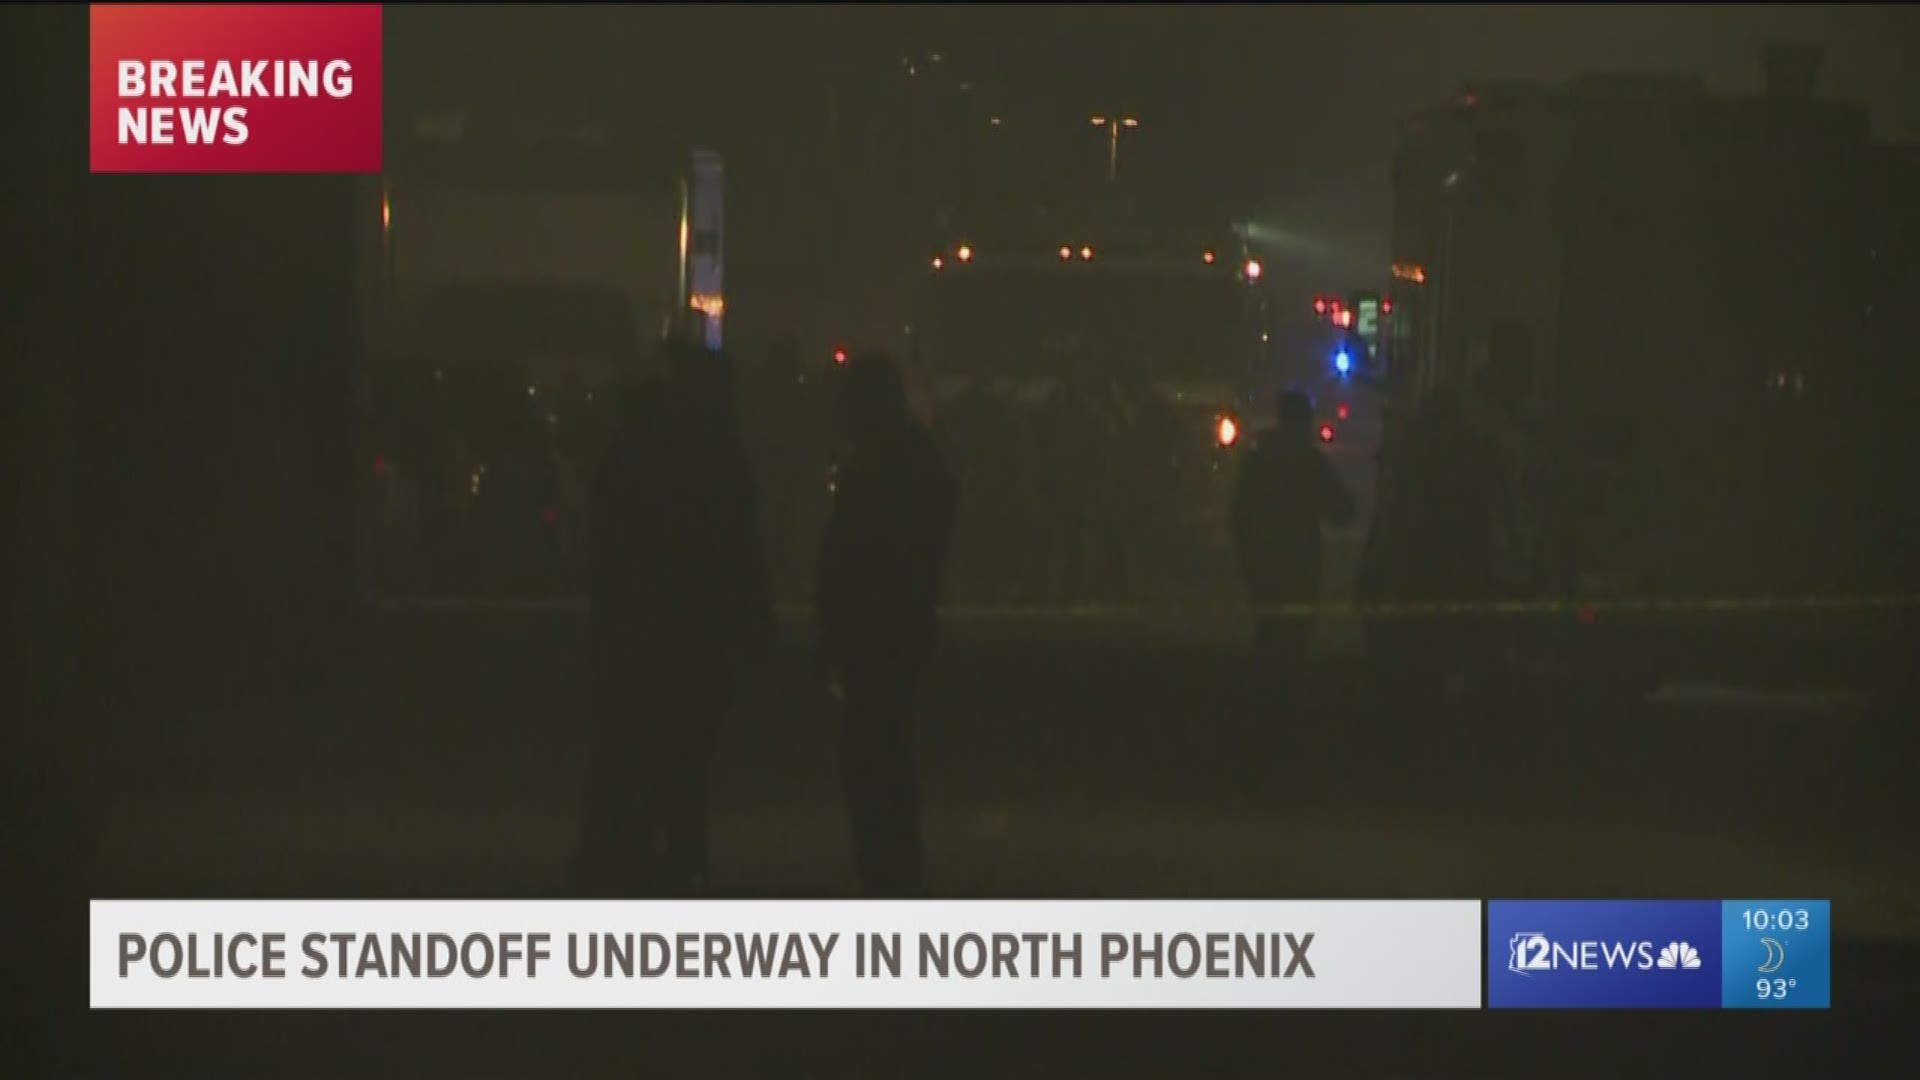 One armed robbery suspect is in custody while another is still barricaded in a north Phoenix home that appears to be on fire.